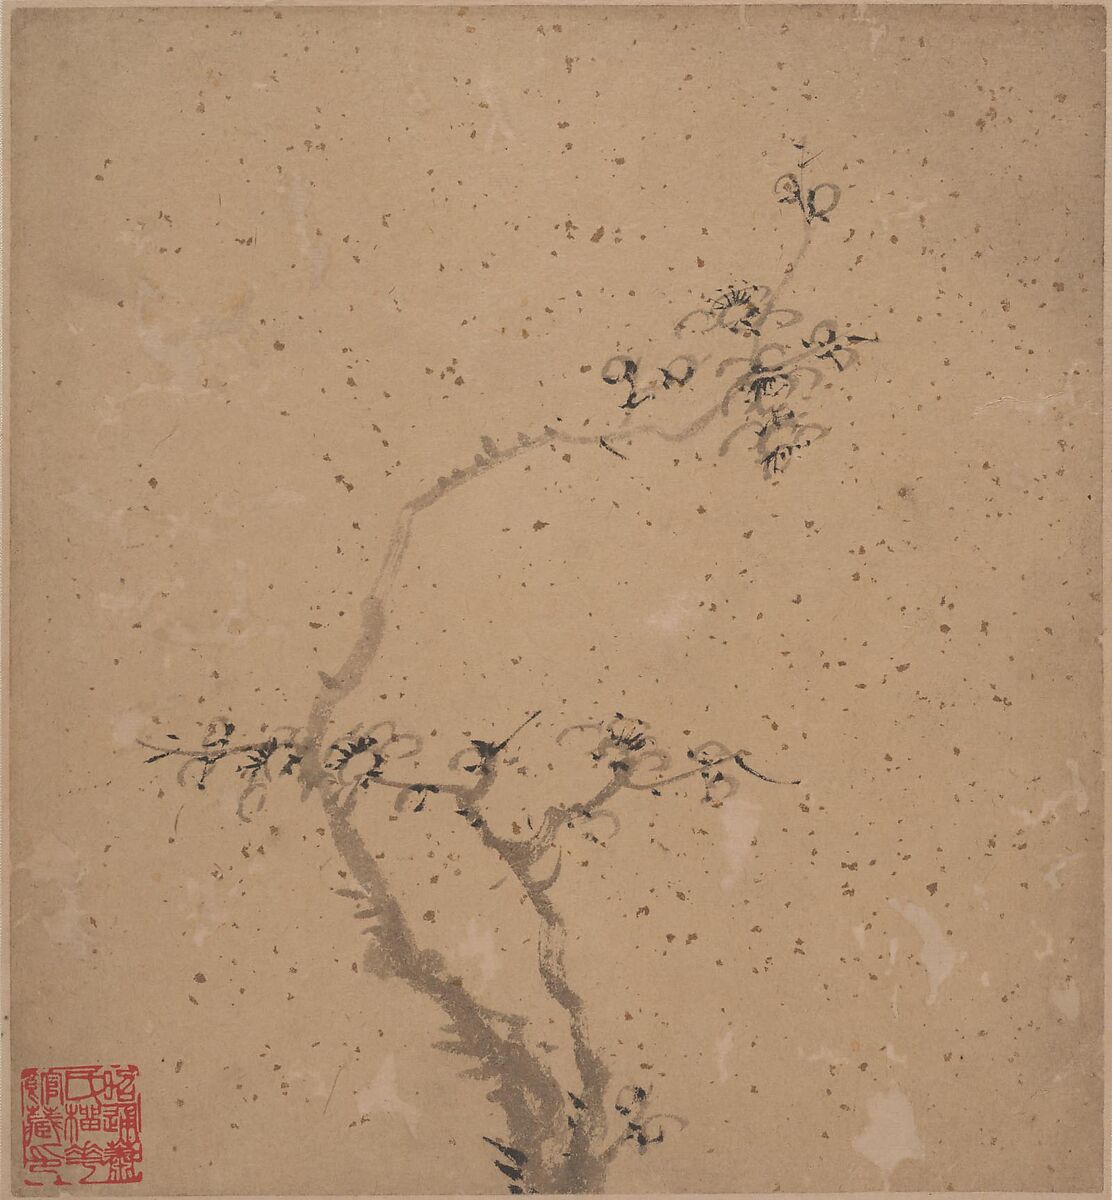 Blossoming Plum, Tang Yifen (Chinese, 1778–1853), Four album leaves; ink on gold-flecked paper, China 